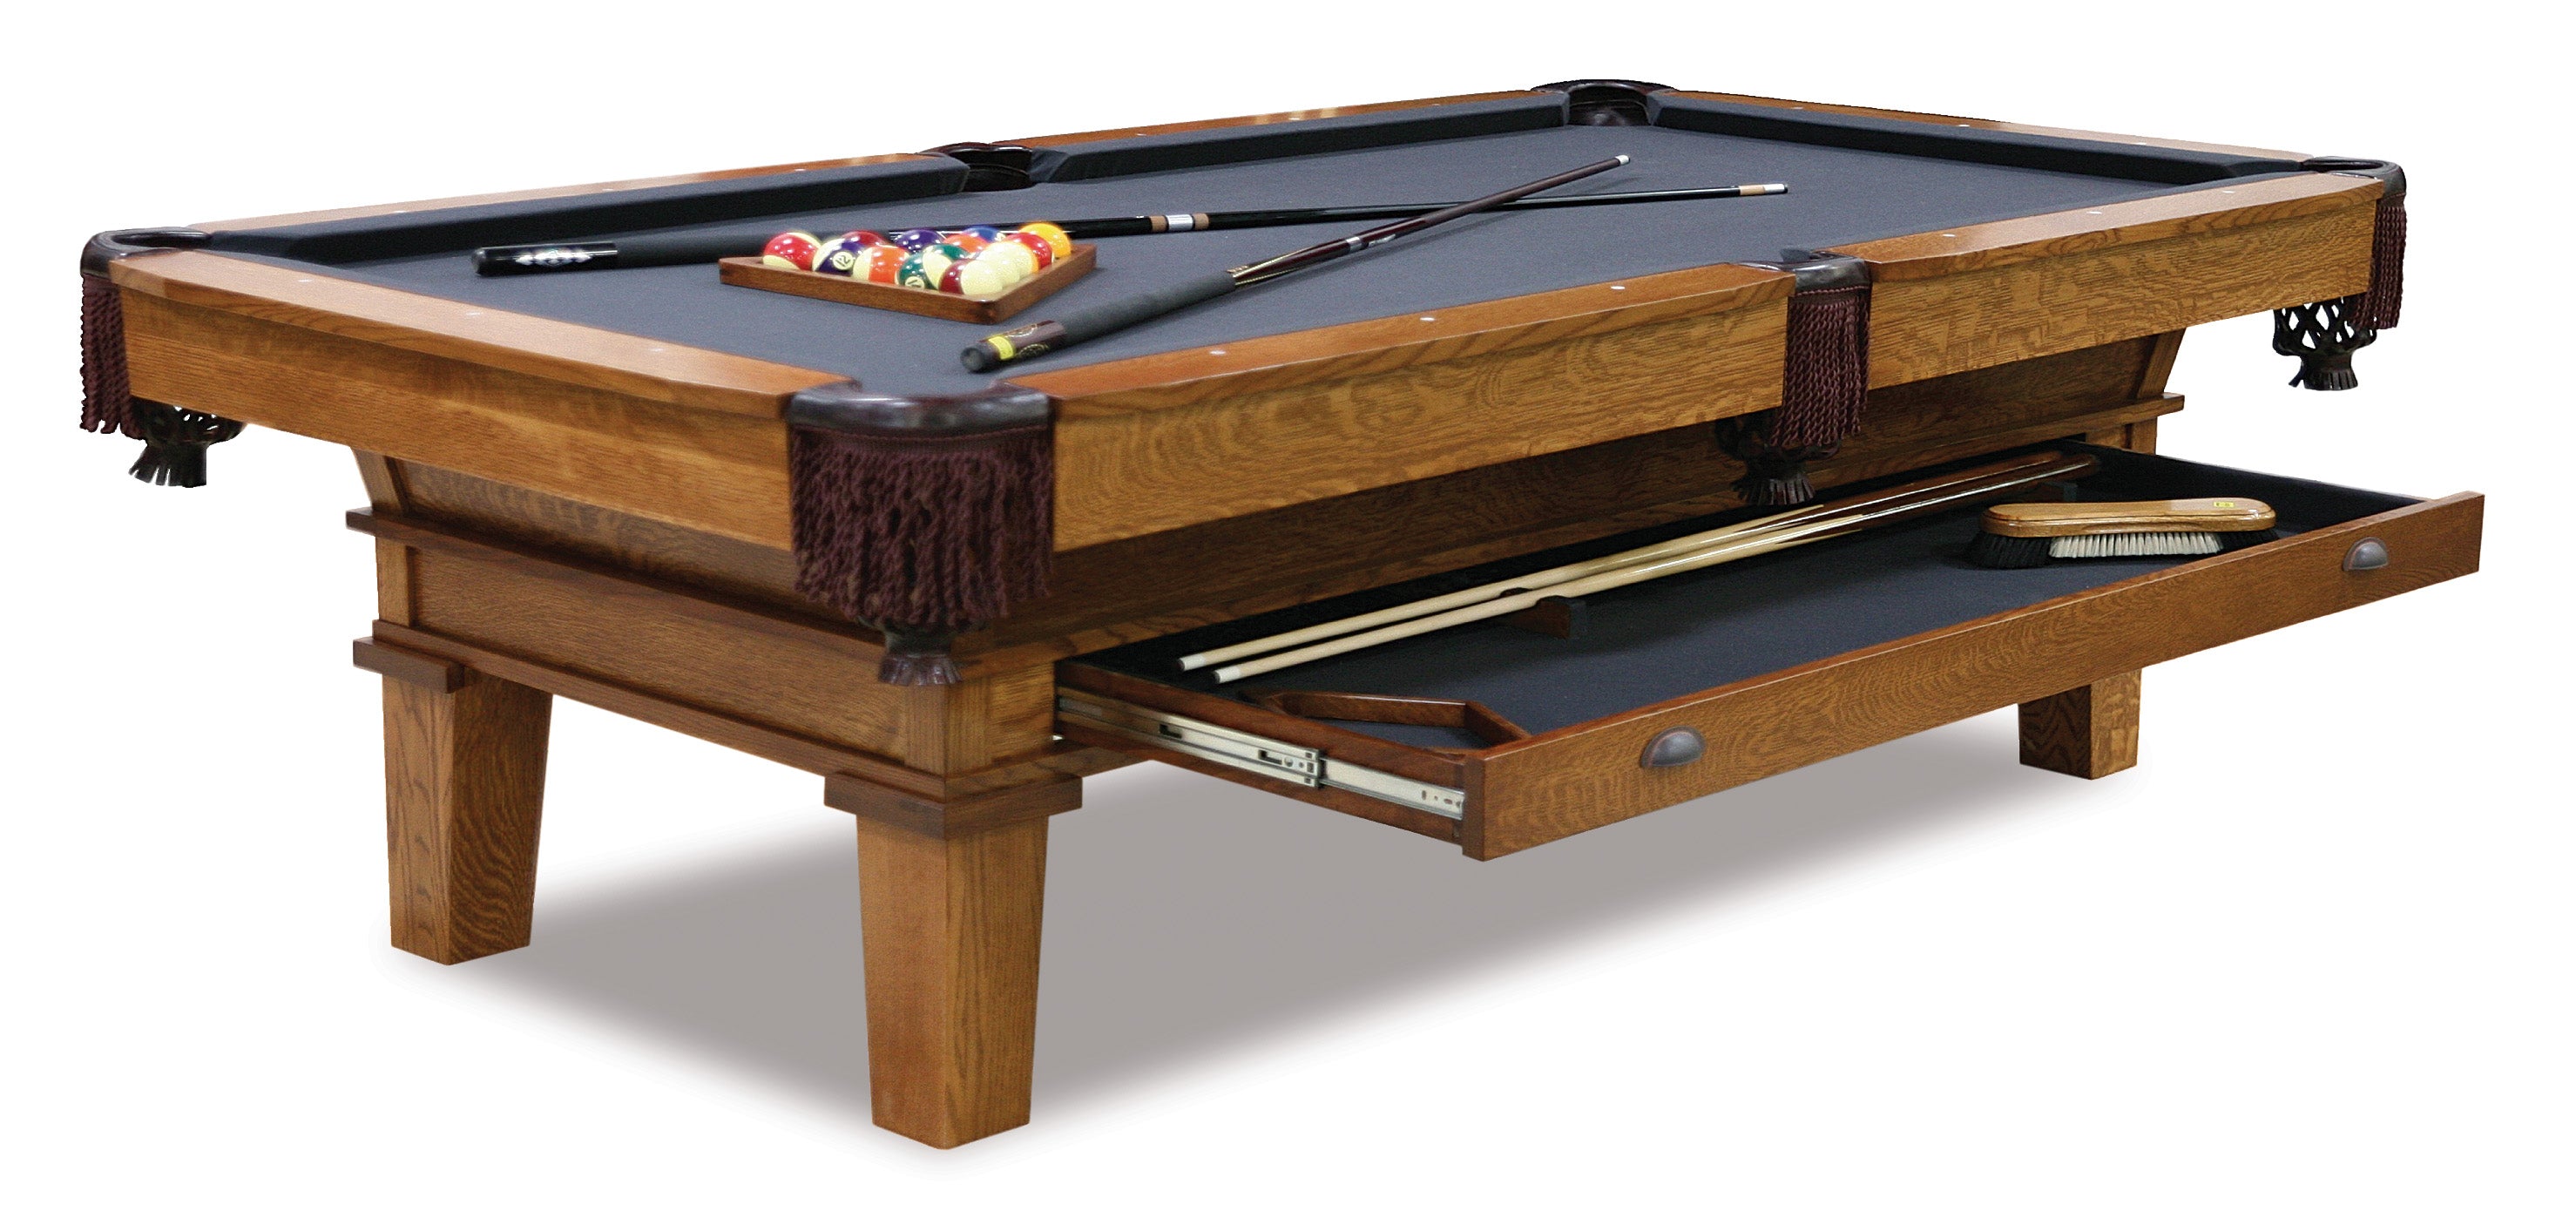 7 ' Hand-crafted Monroe Pool Table (Brown Maple)